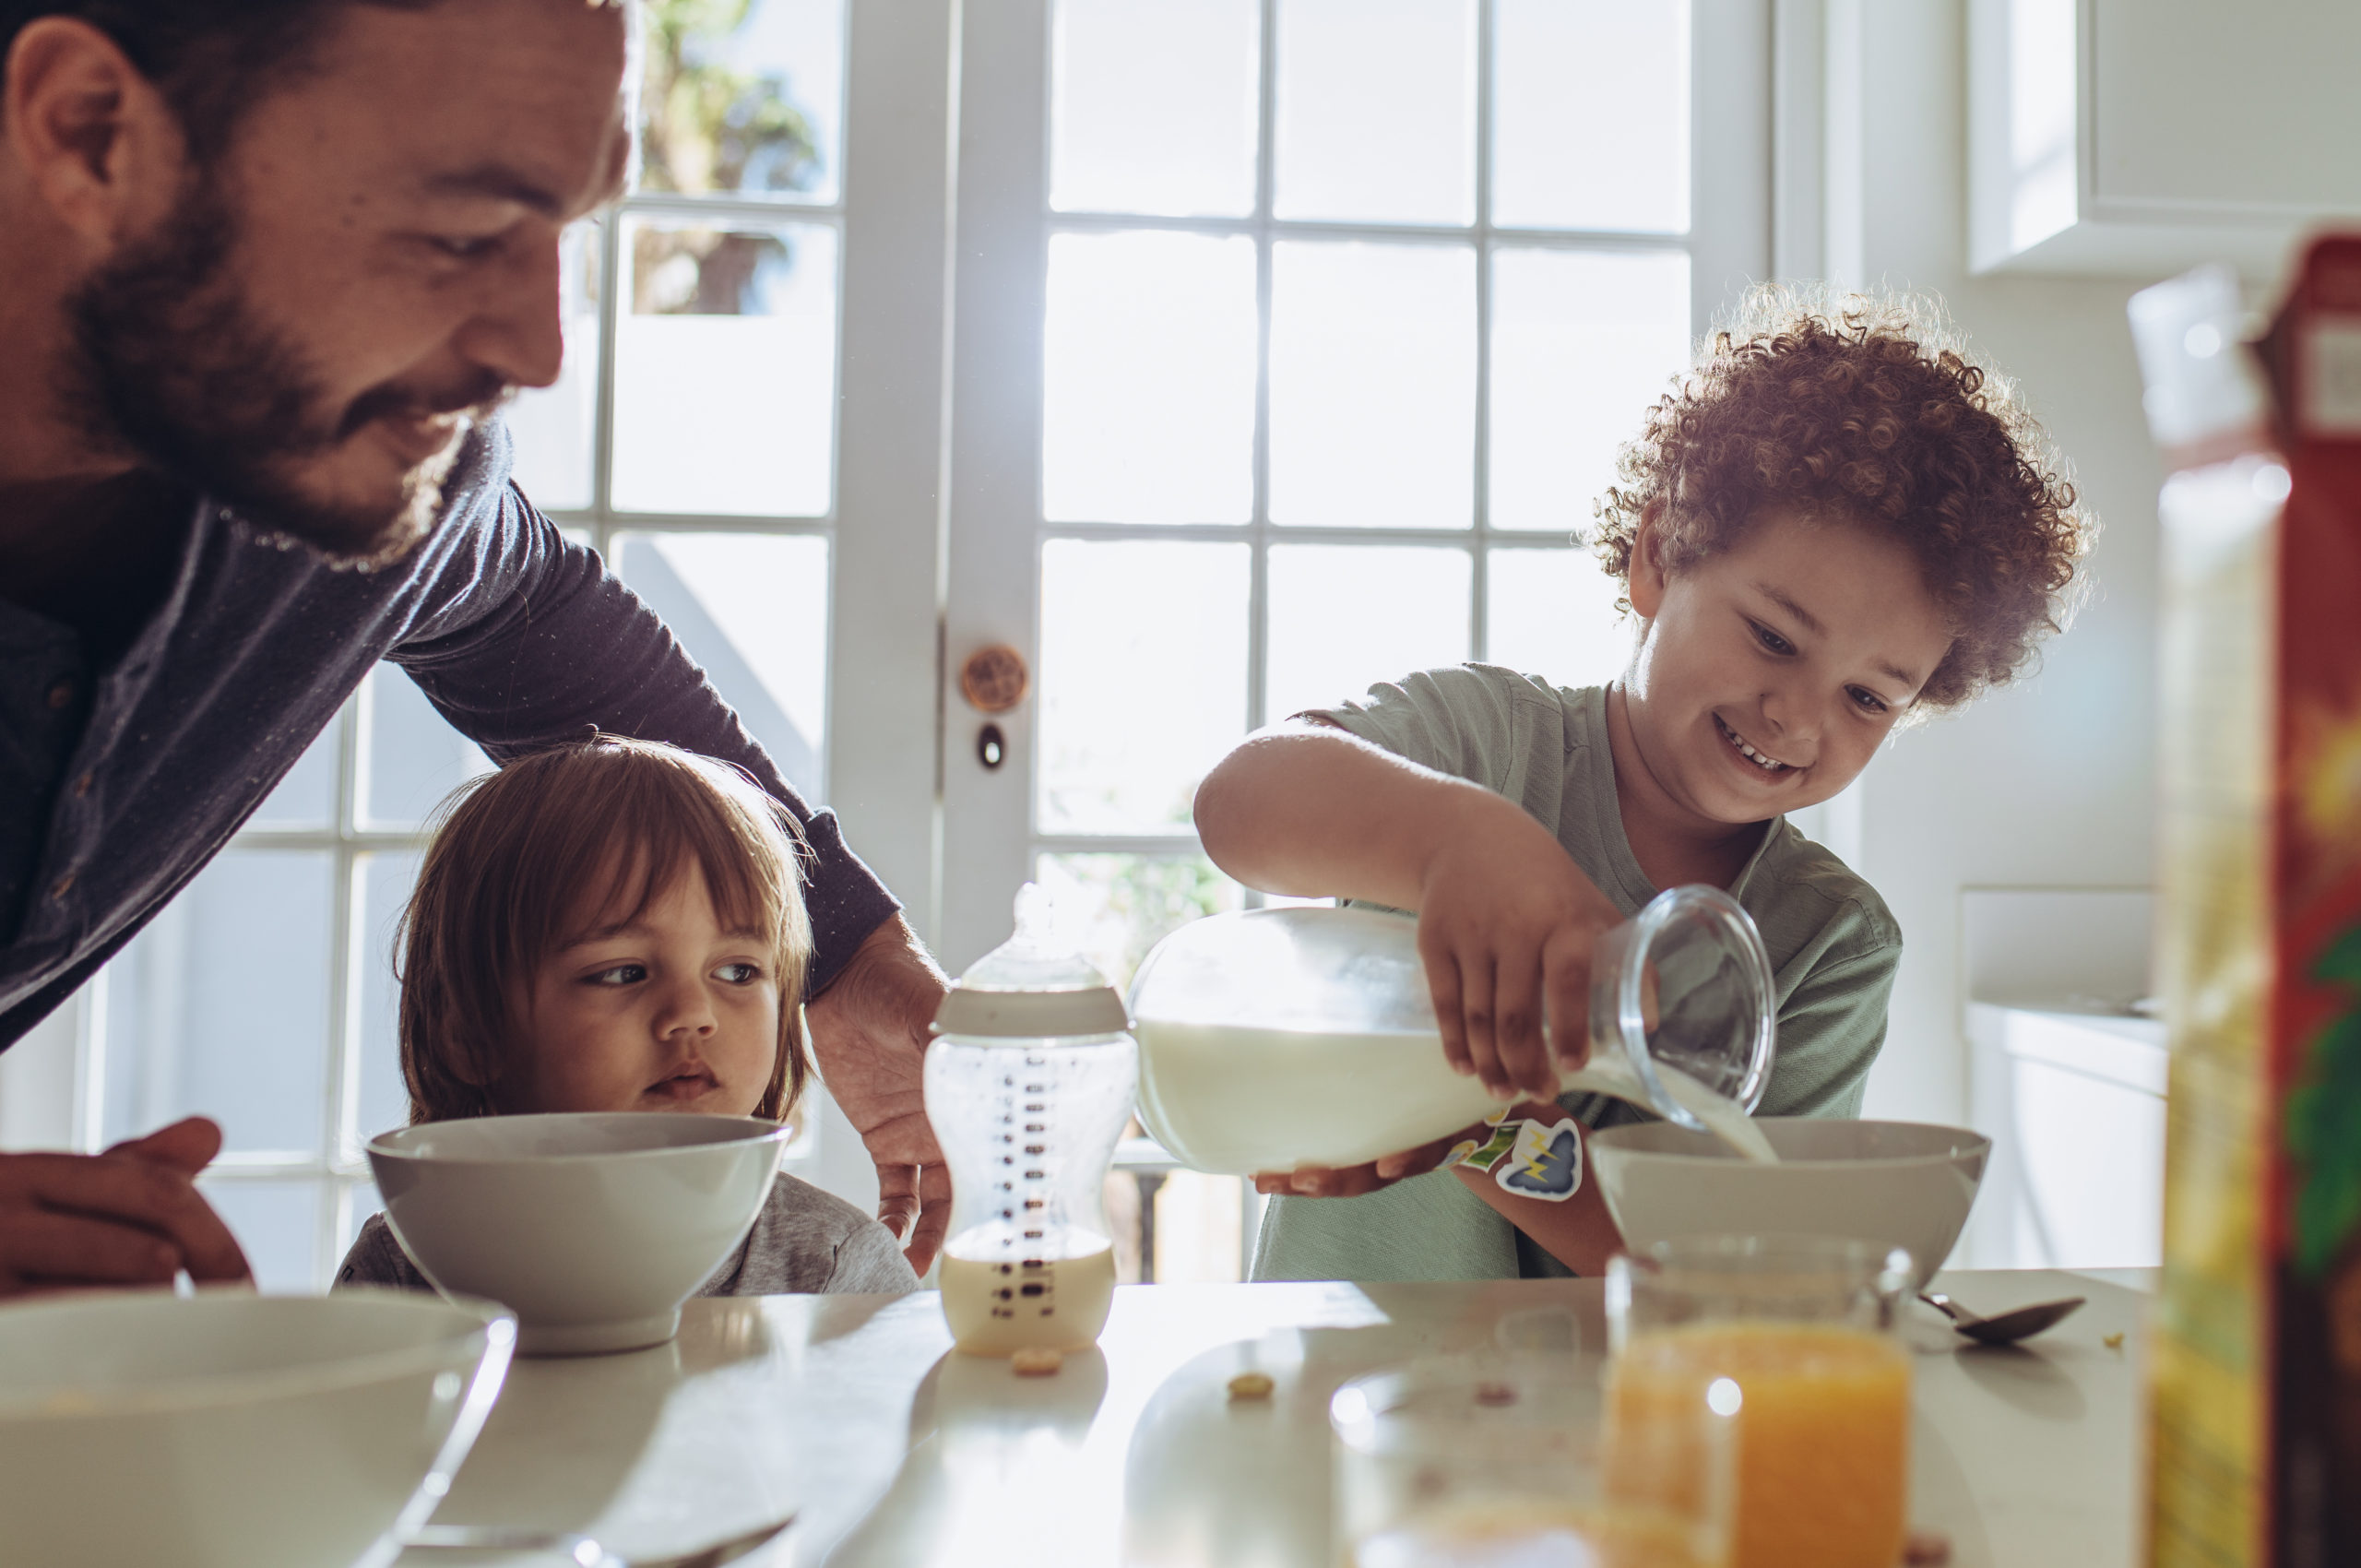 Does Eating Breakfast Impact Our Health More Than Other Meals?